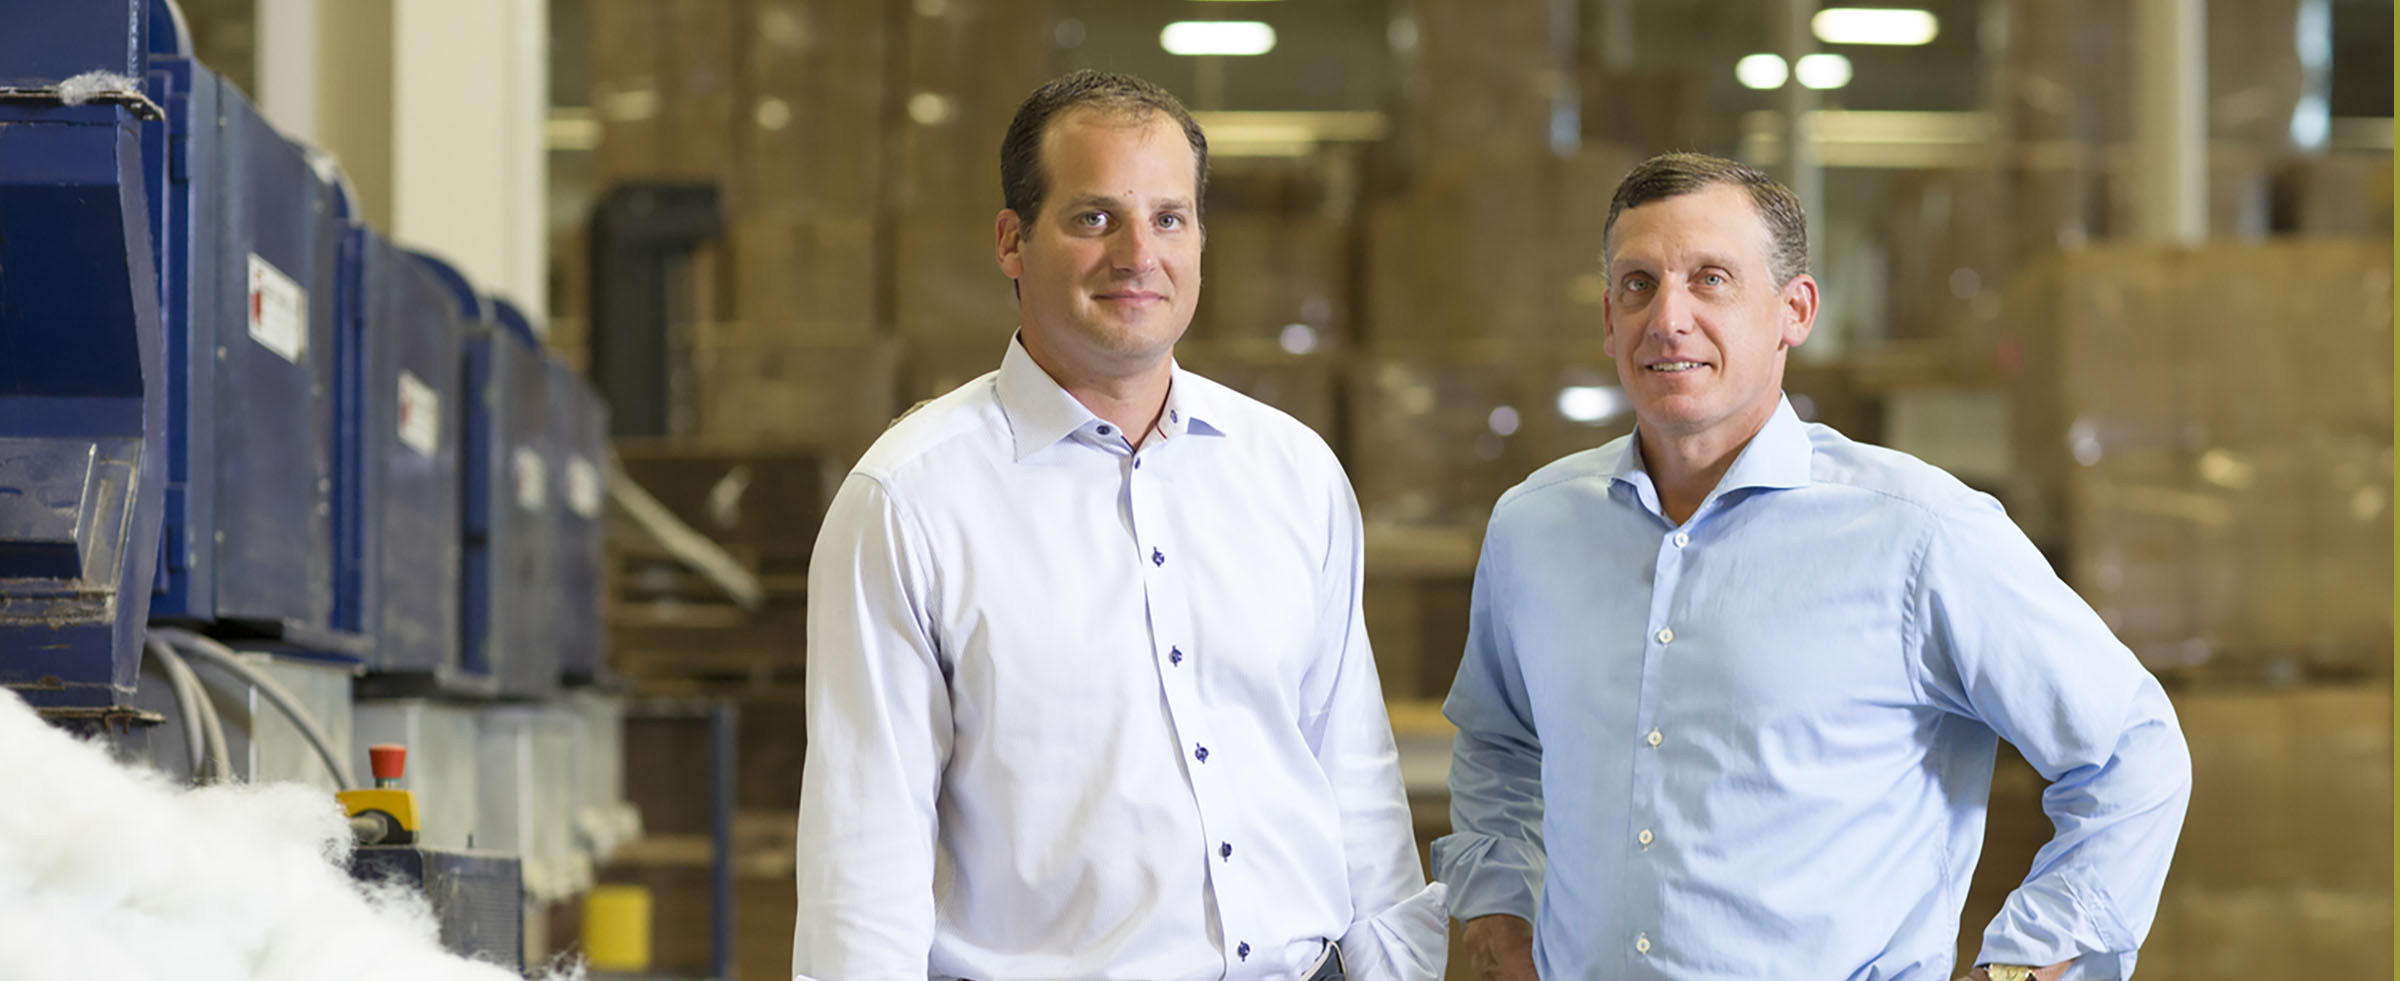 Blake Ruttenberg, executive vice president of American Textile Co., and his brother, Lance, the company’s CEO, have made philanthropy through The Pittsburgh Foundation a priority for their family and their business.